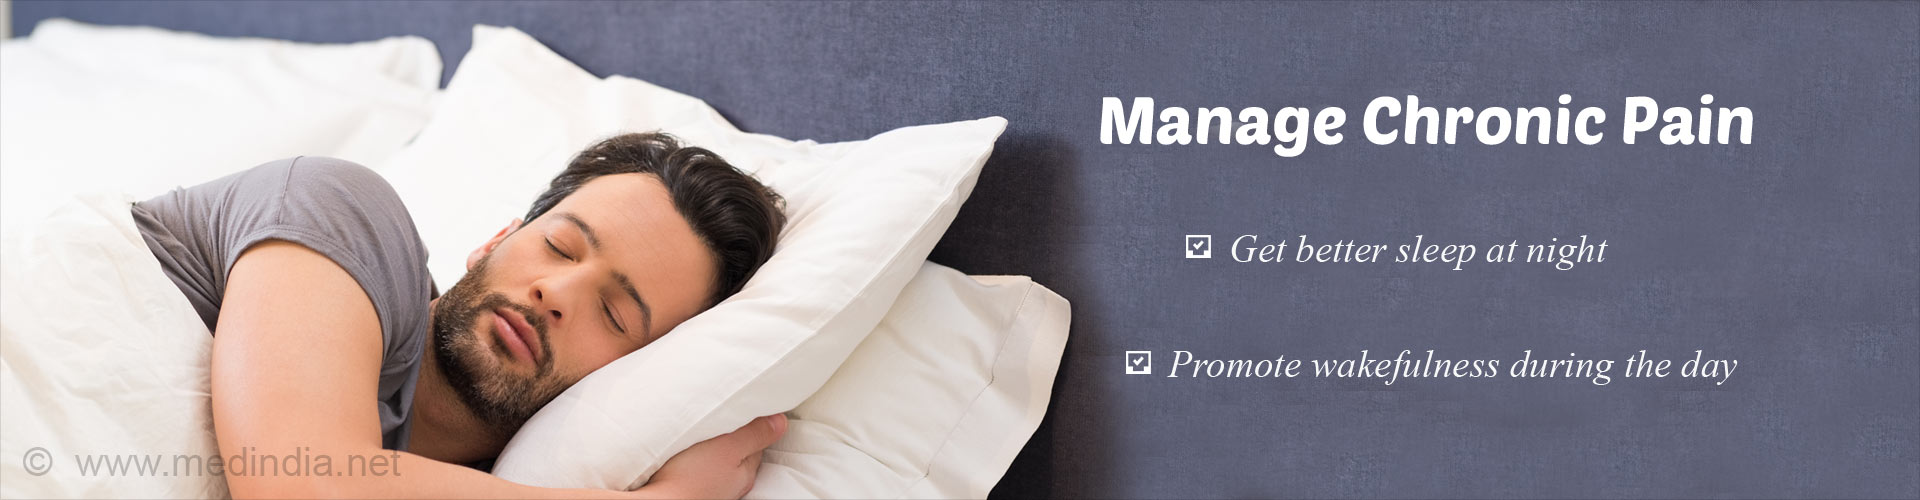 Manage Chronic Pain
- Get better sleep at night
- Promote wakefulness during the day